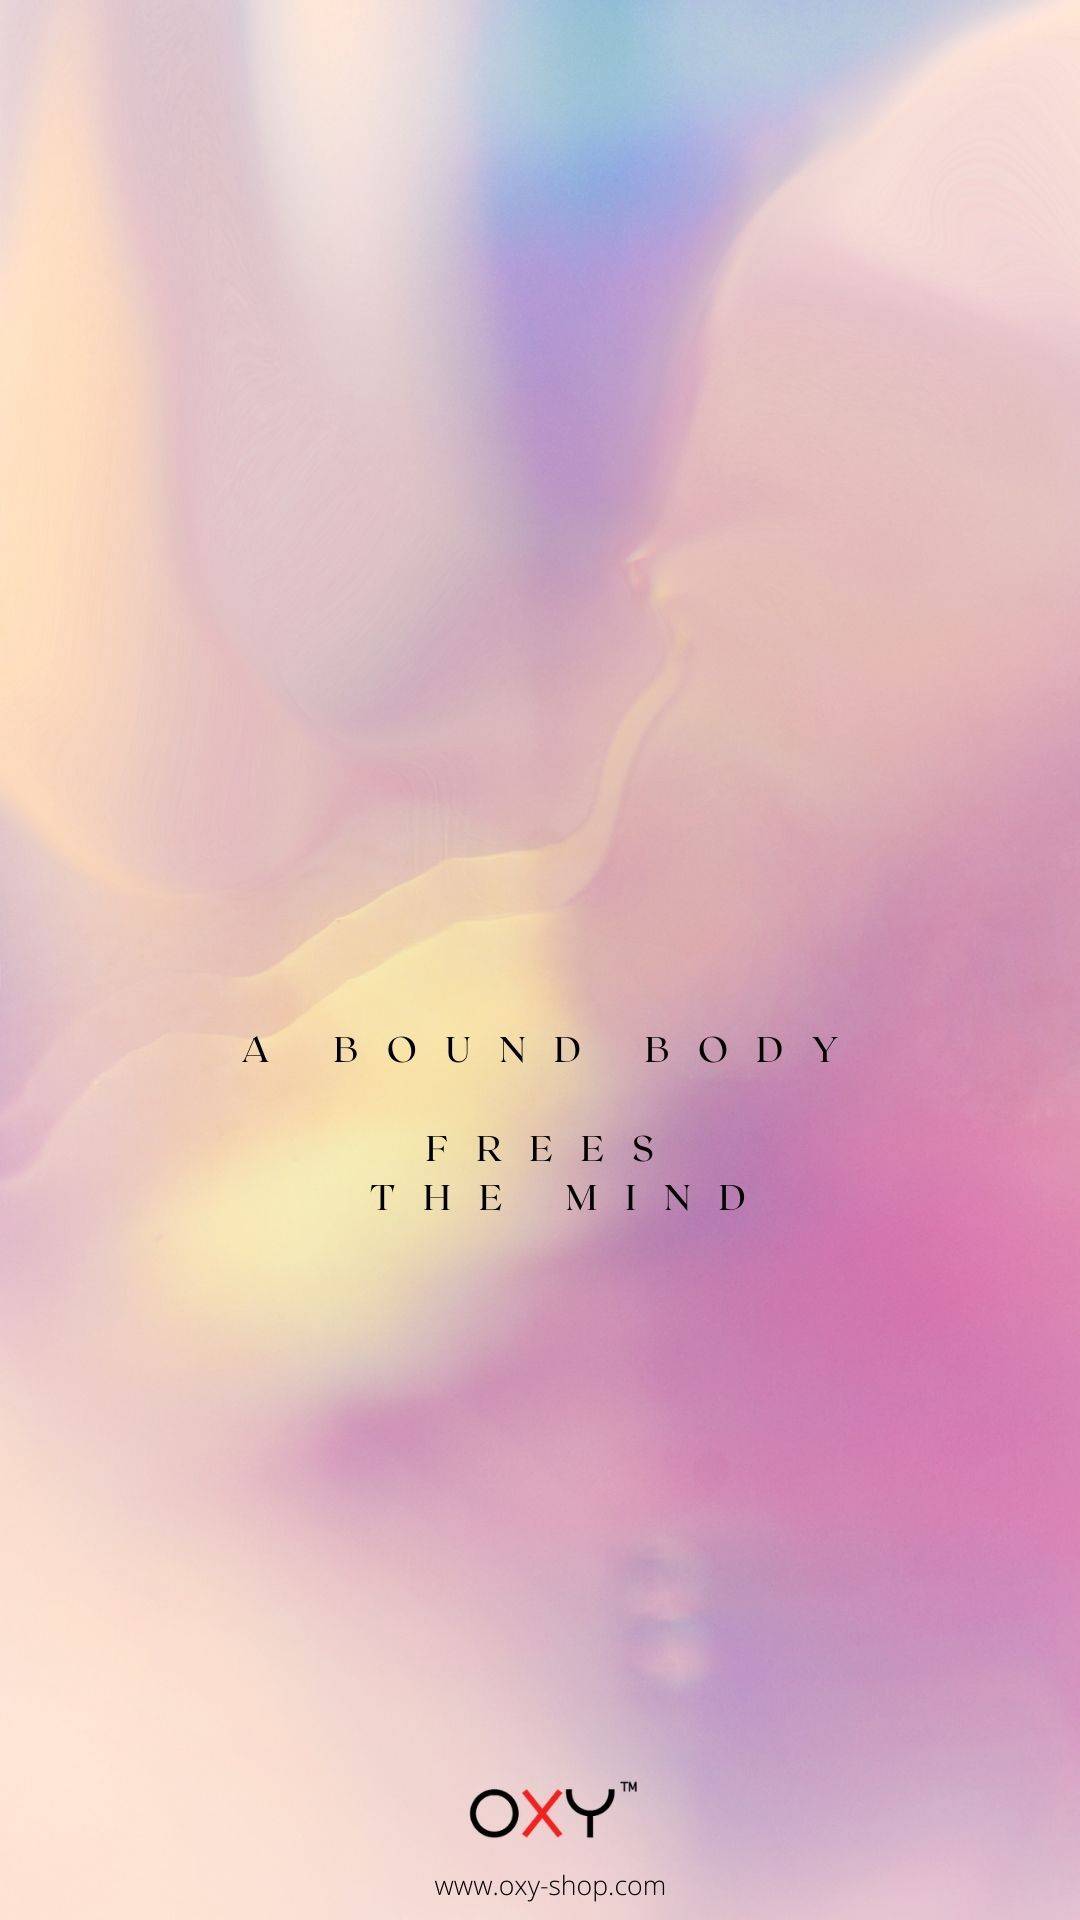 A bound body frees the mind. - BDSM wallpaper 